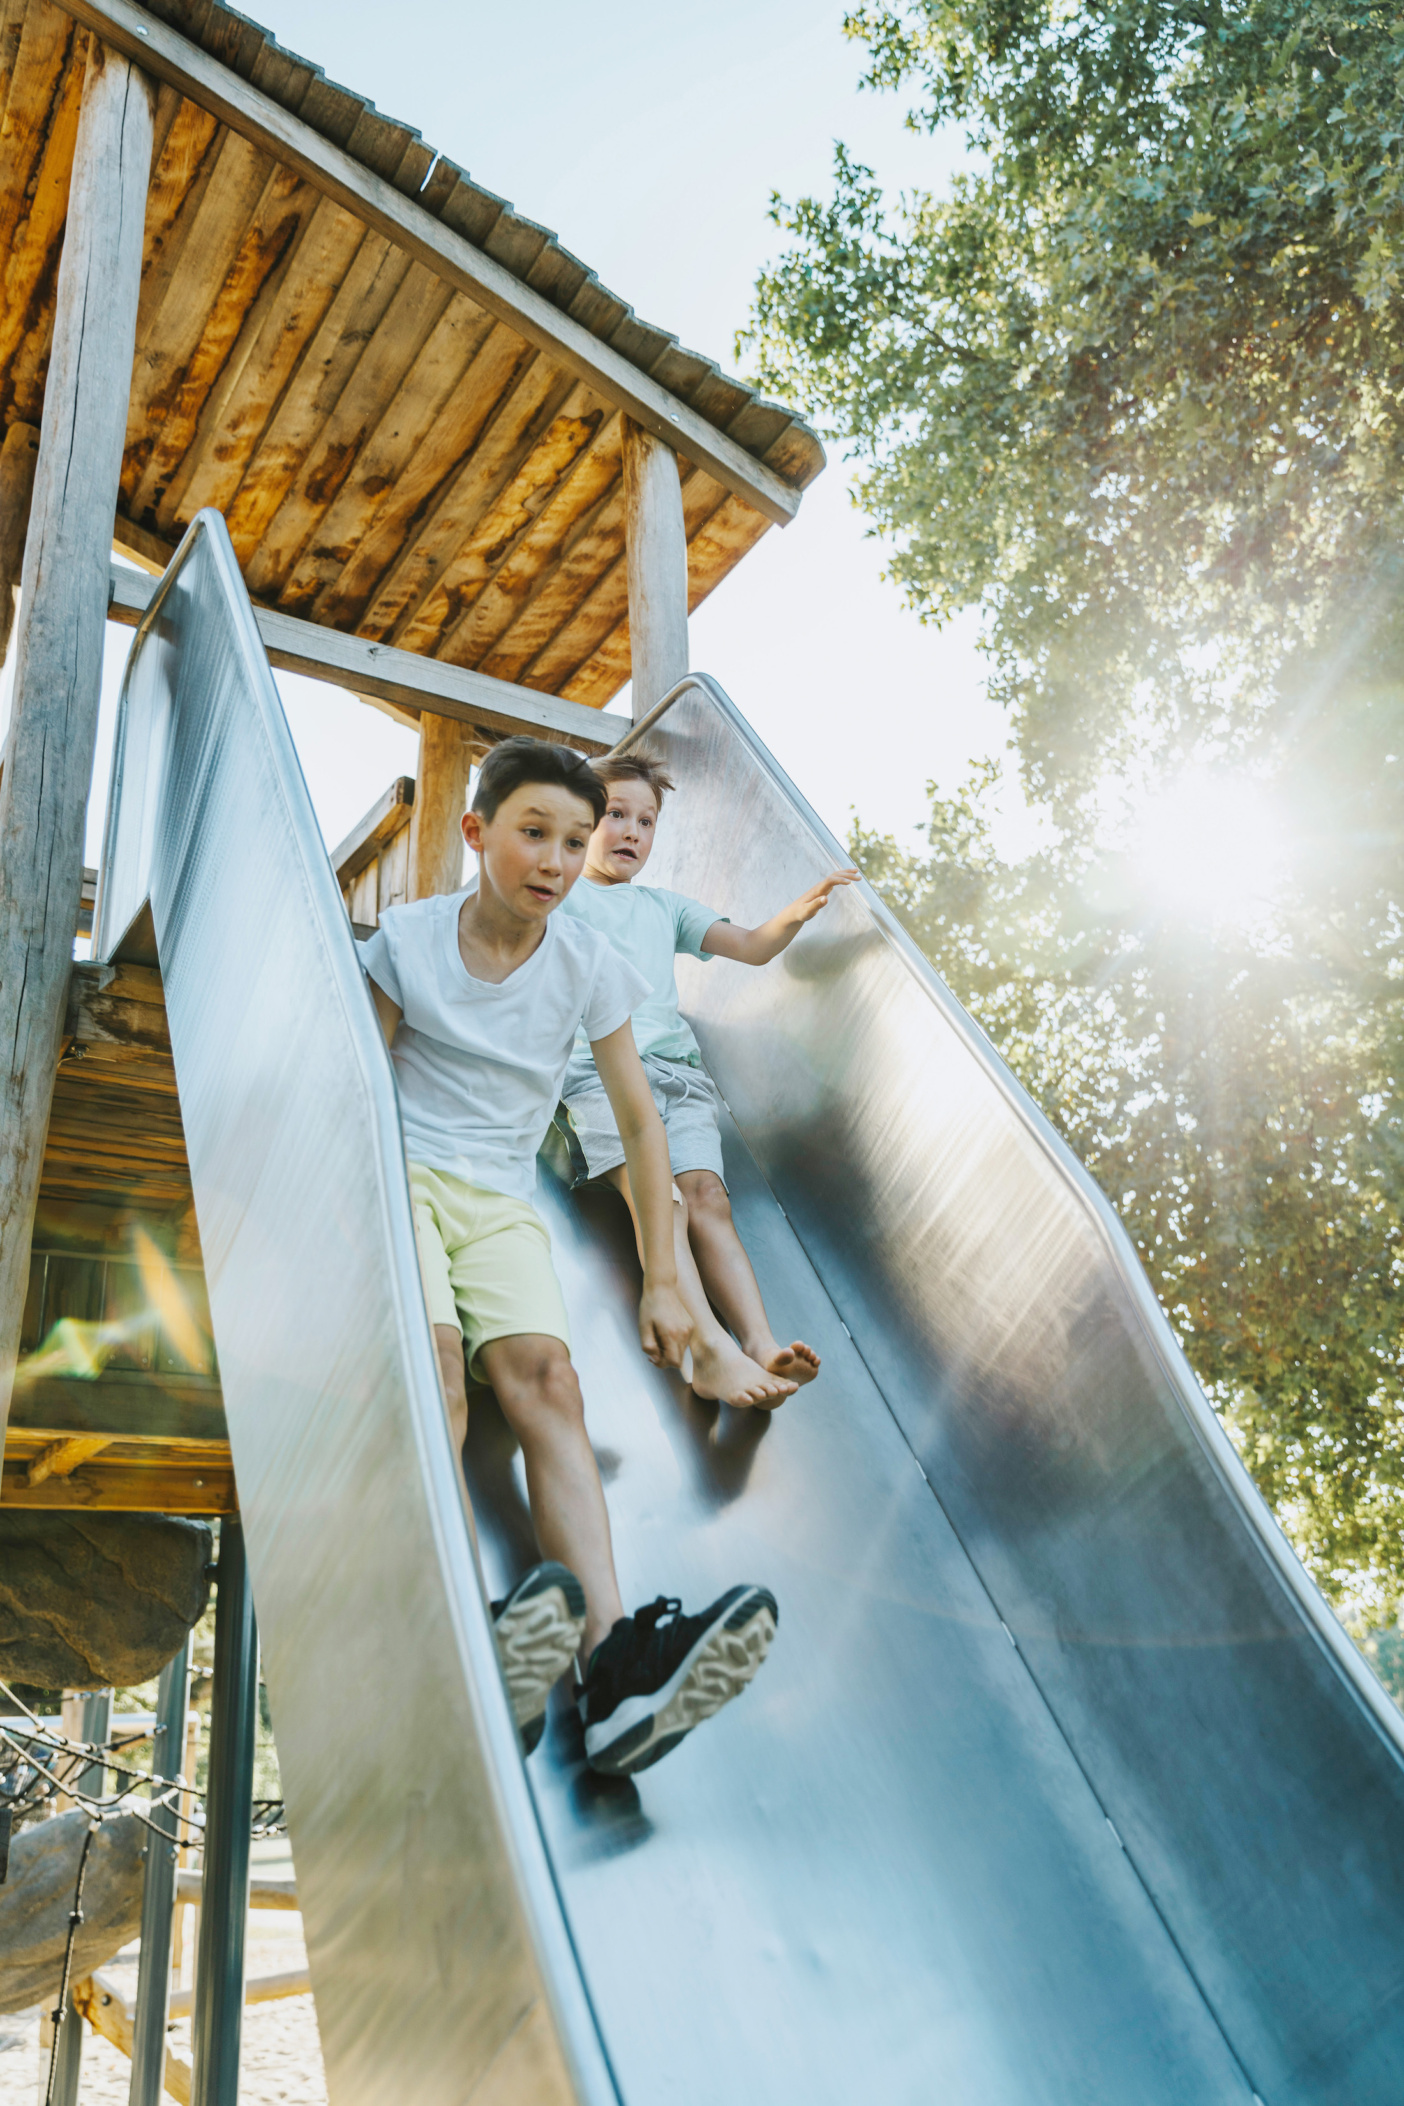 Boys using a steep slide on playground, Cologne, NRW, Germany